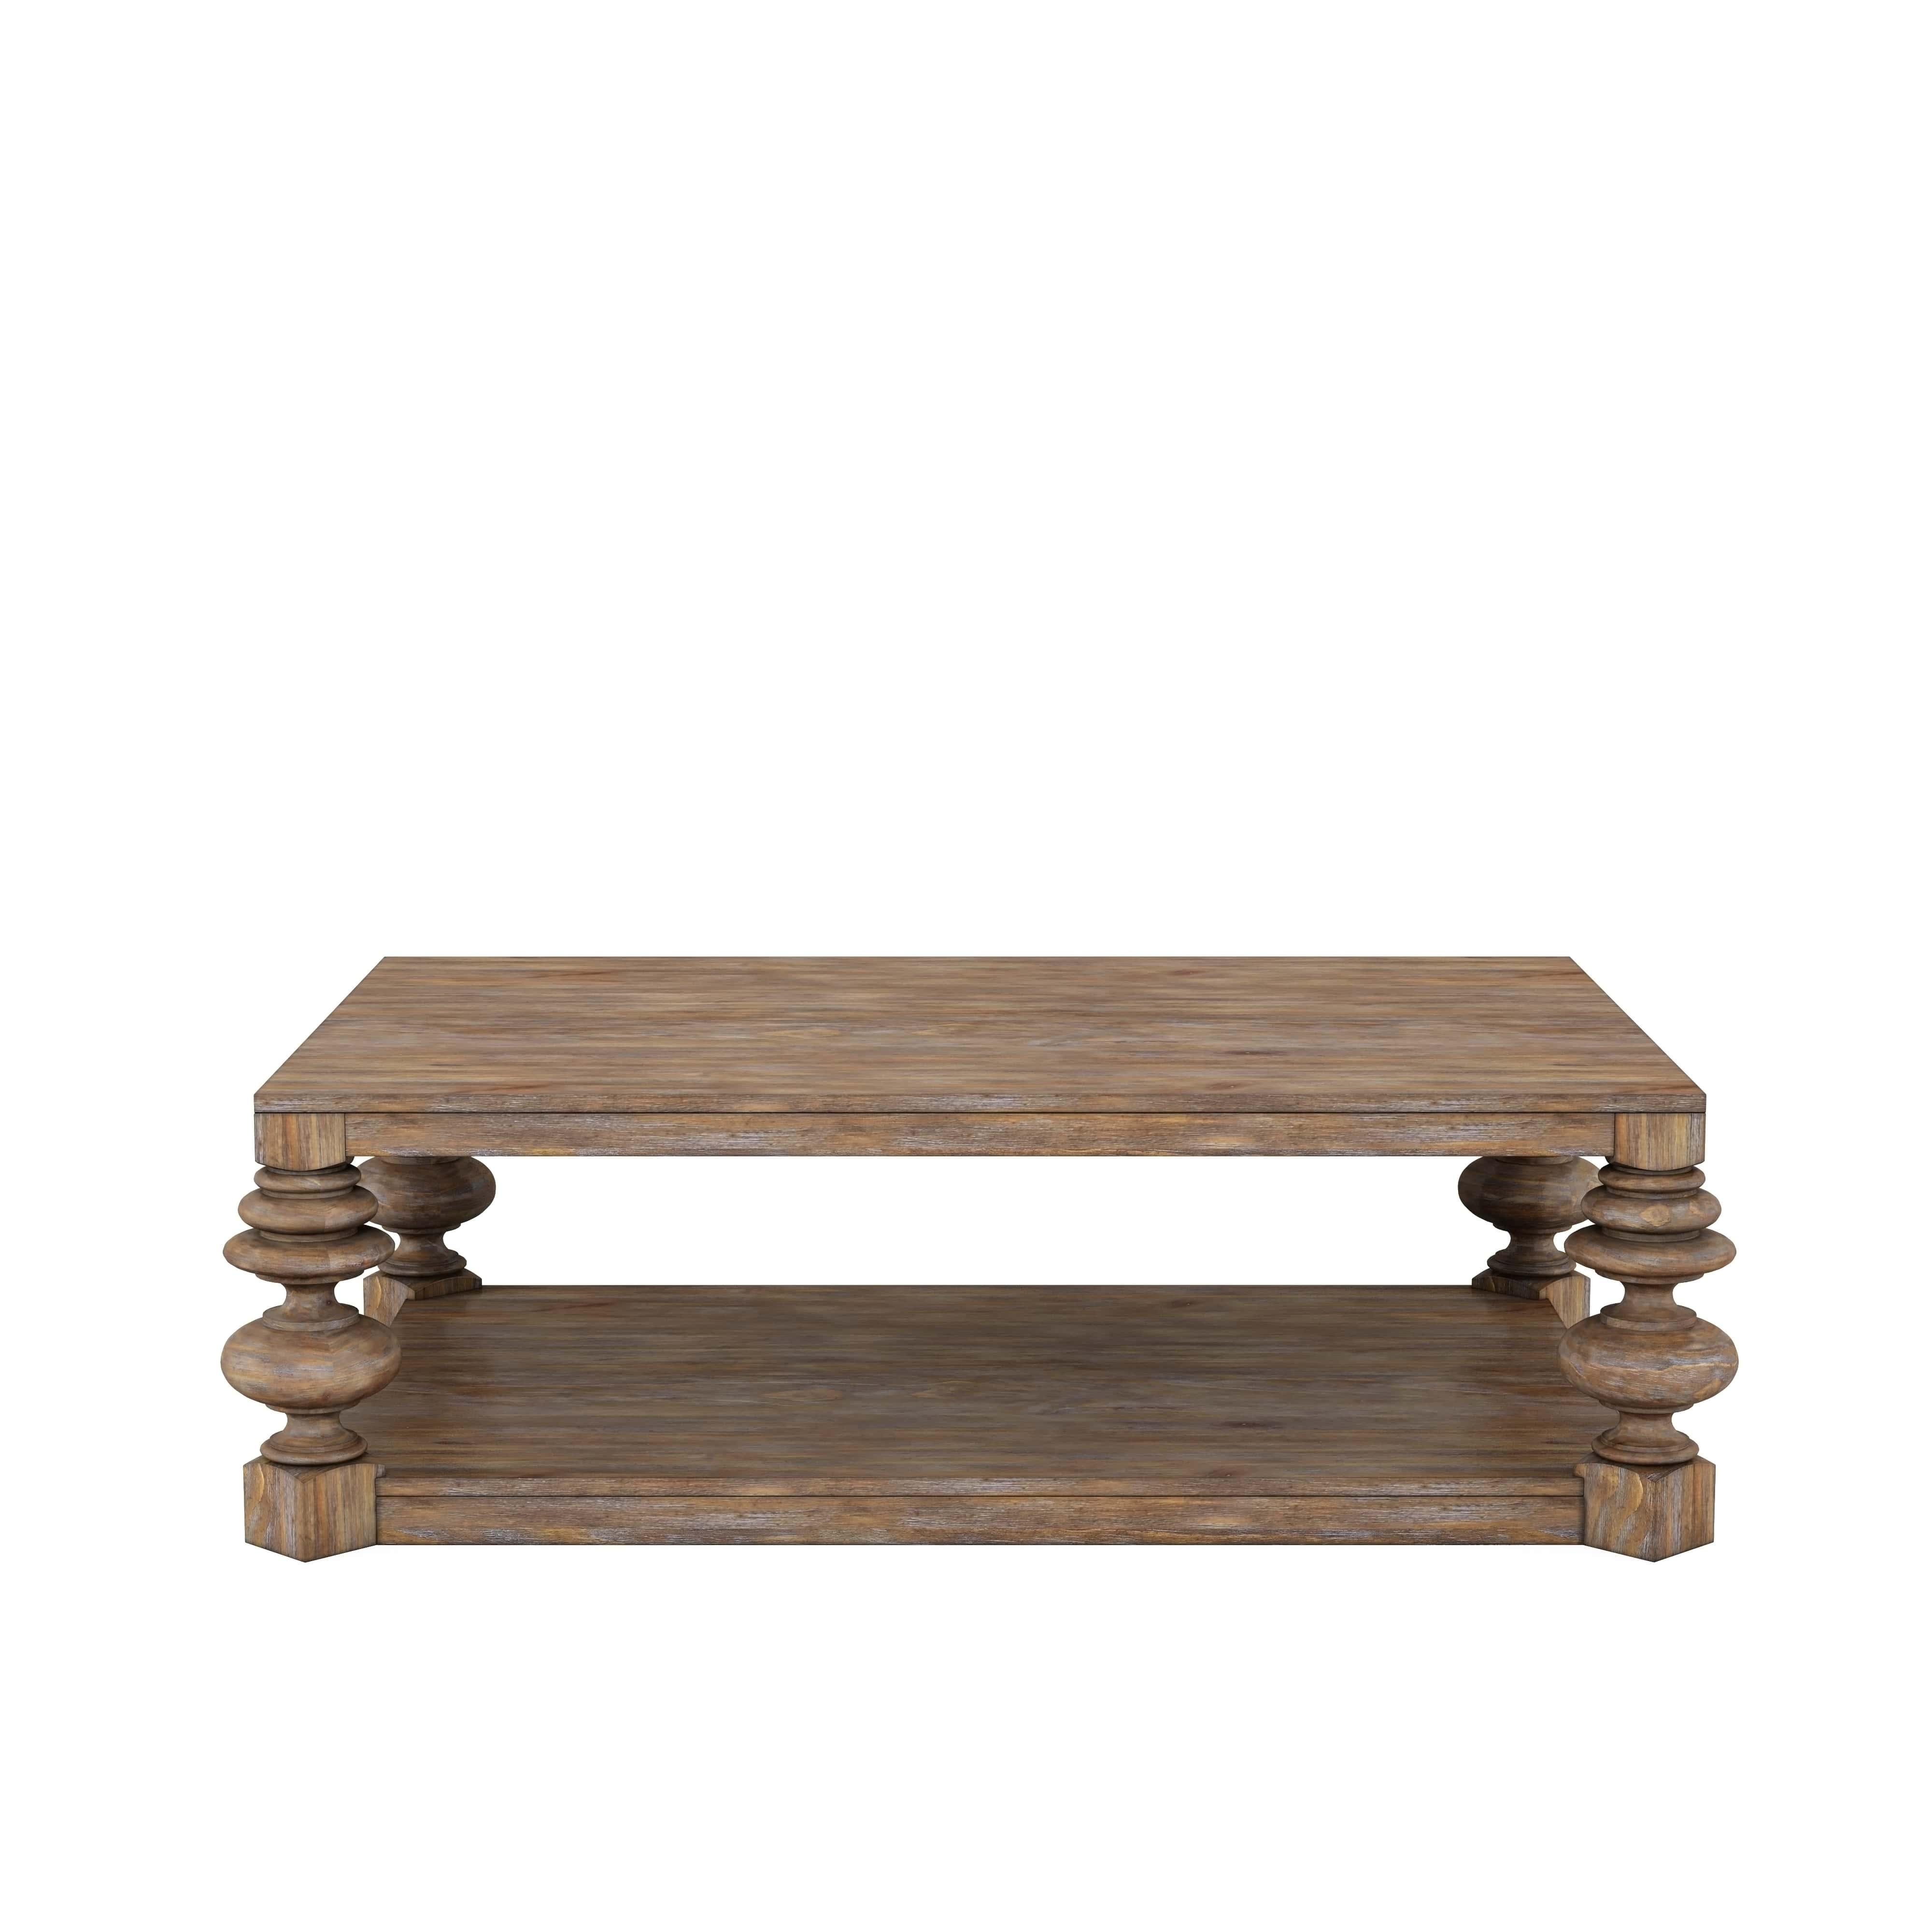 Traditional, Farmhouse Coffee Table Architrave 277300-2608 in Brown 